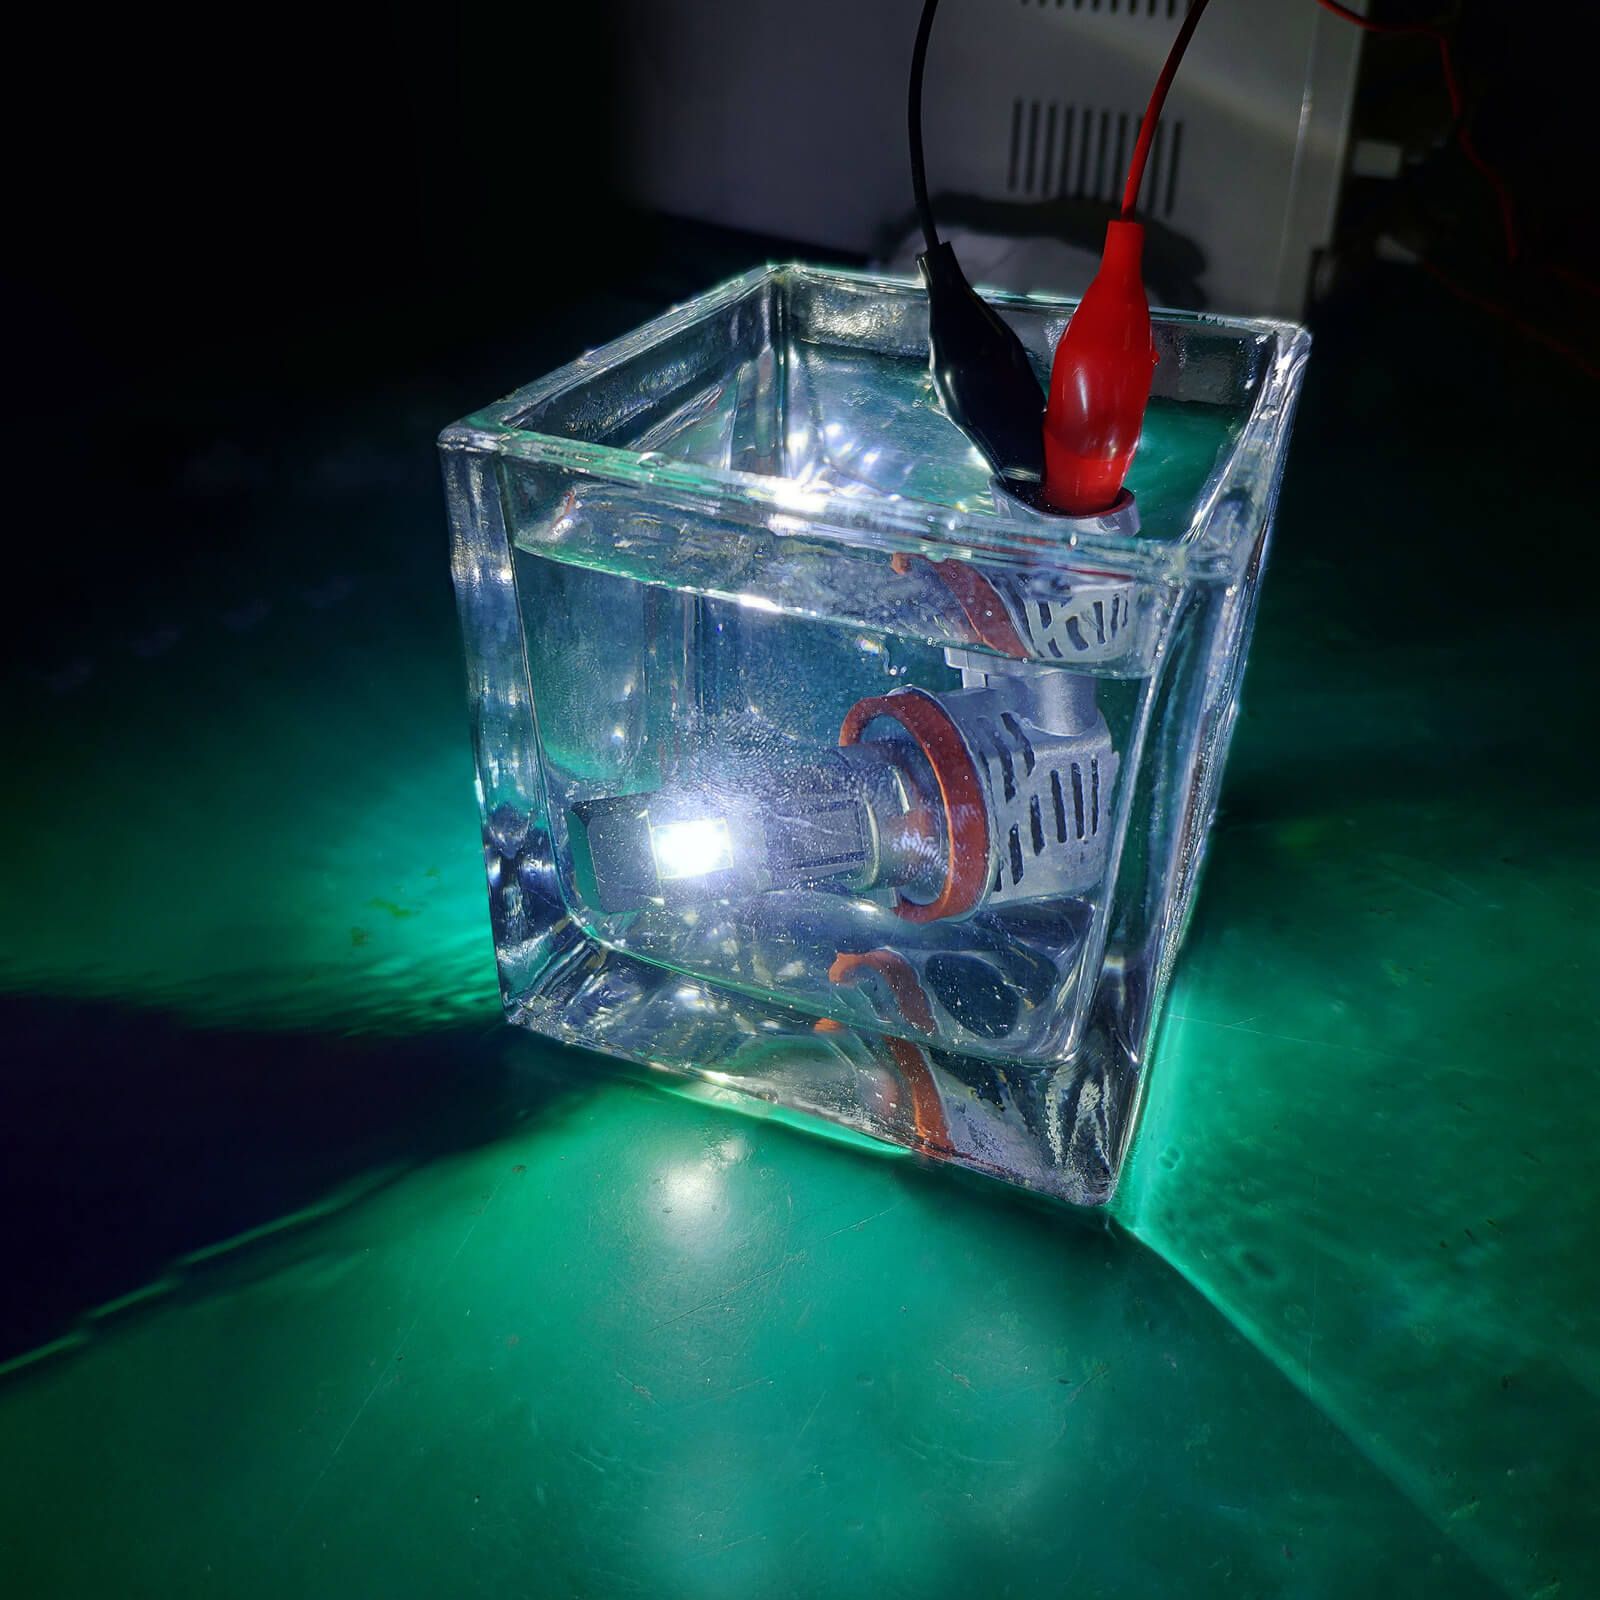 A Surefit LED globe submerged in a glass of water